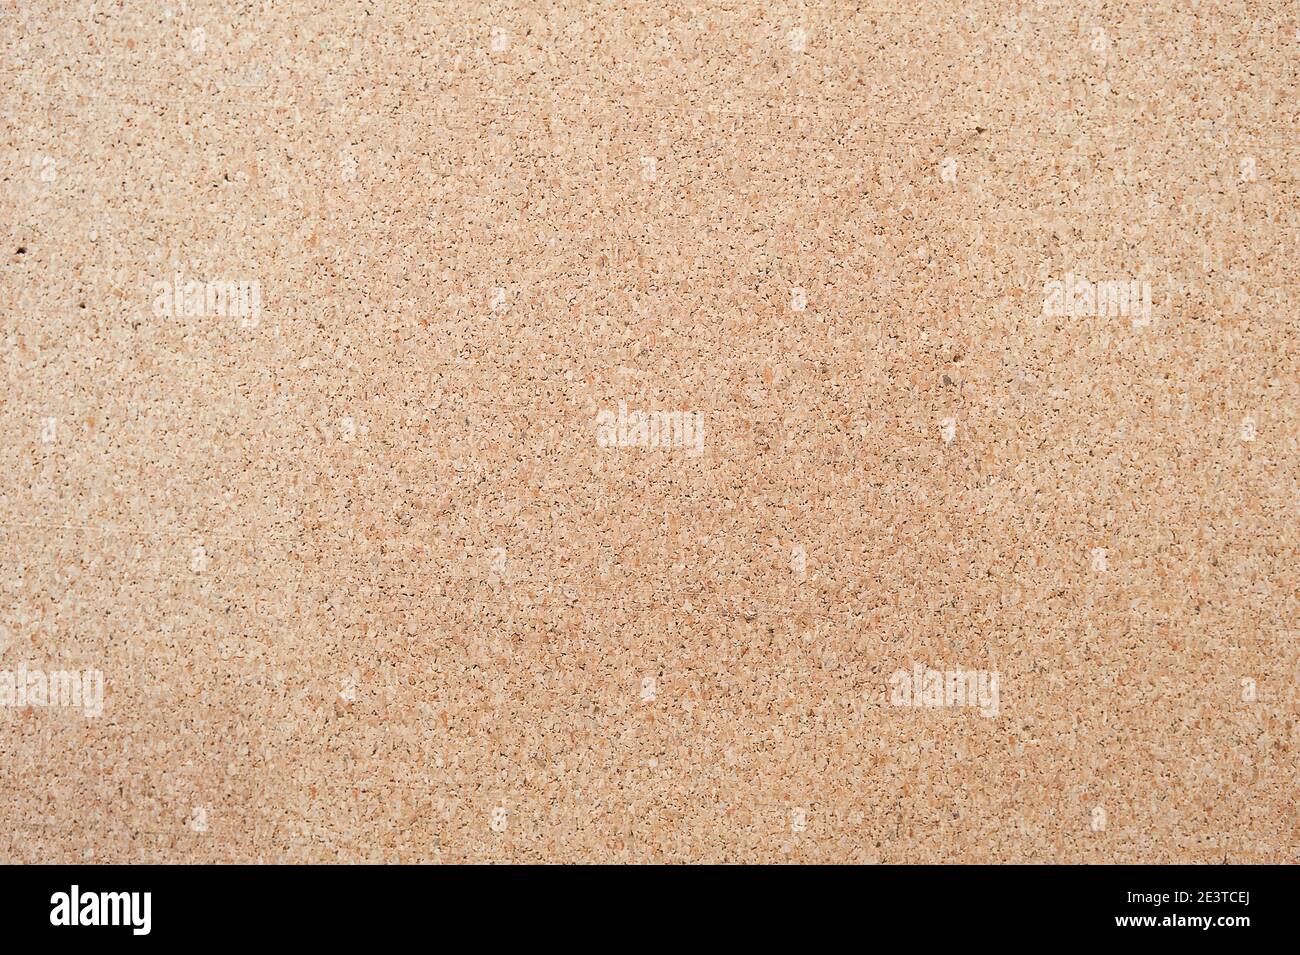 Cork texture background with place for your text Stock Photo